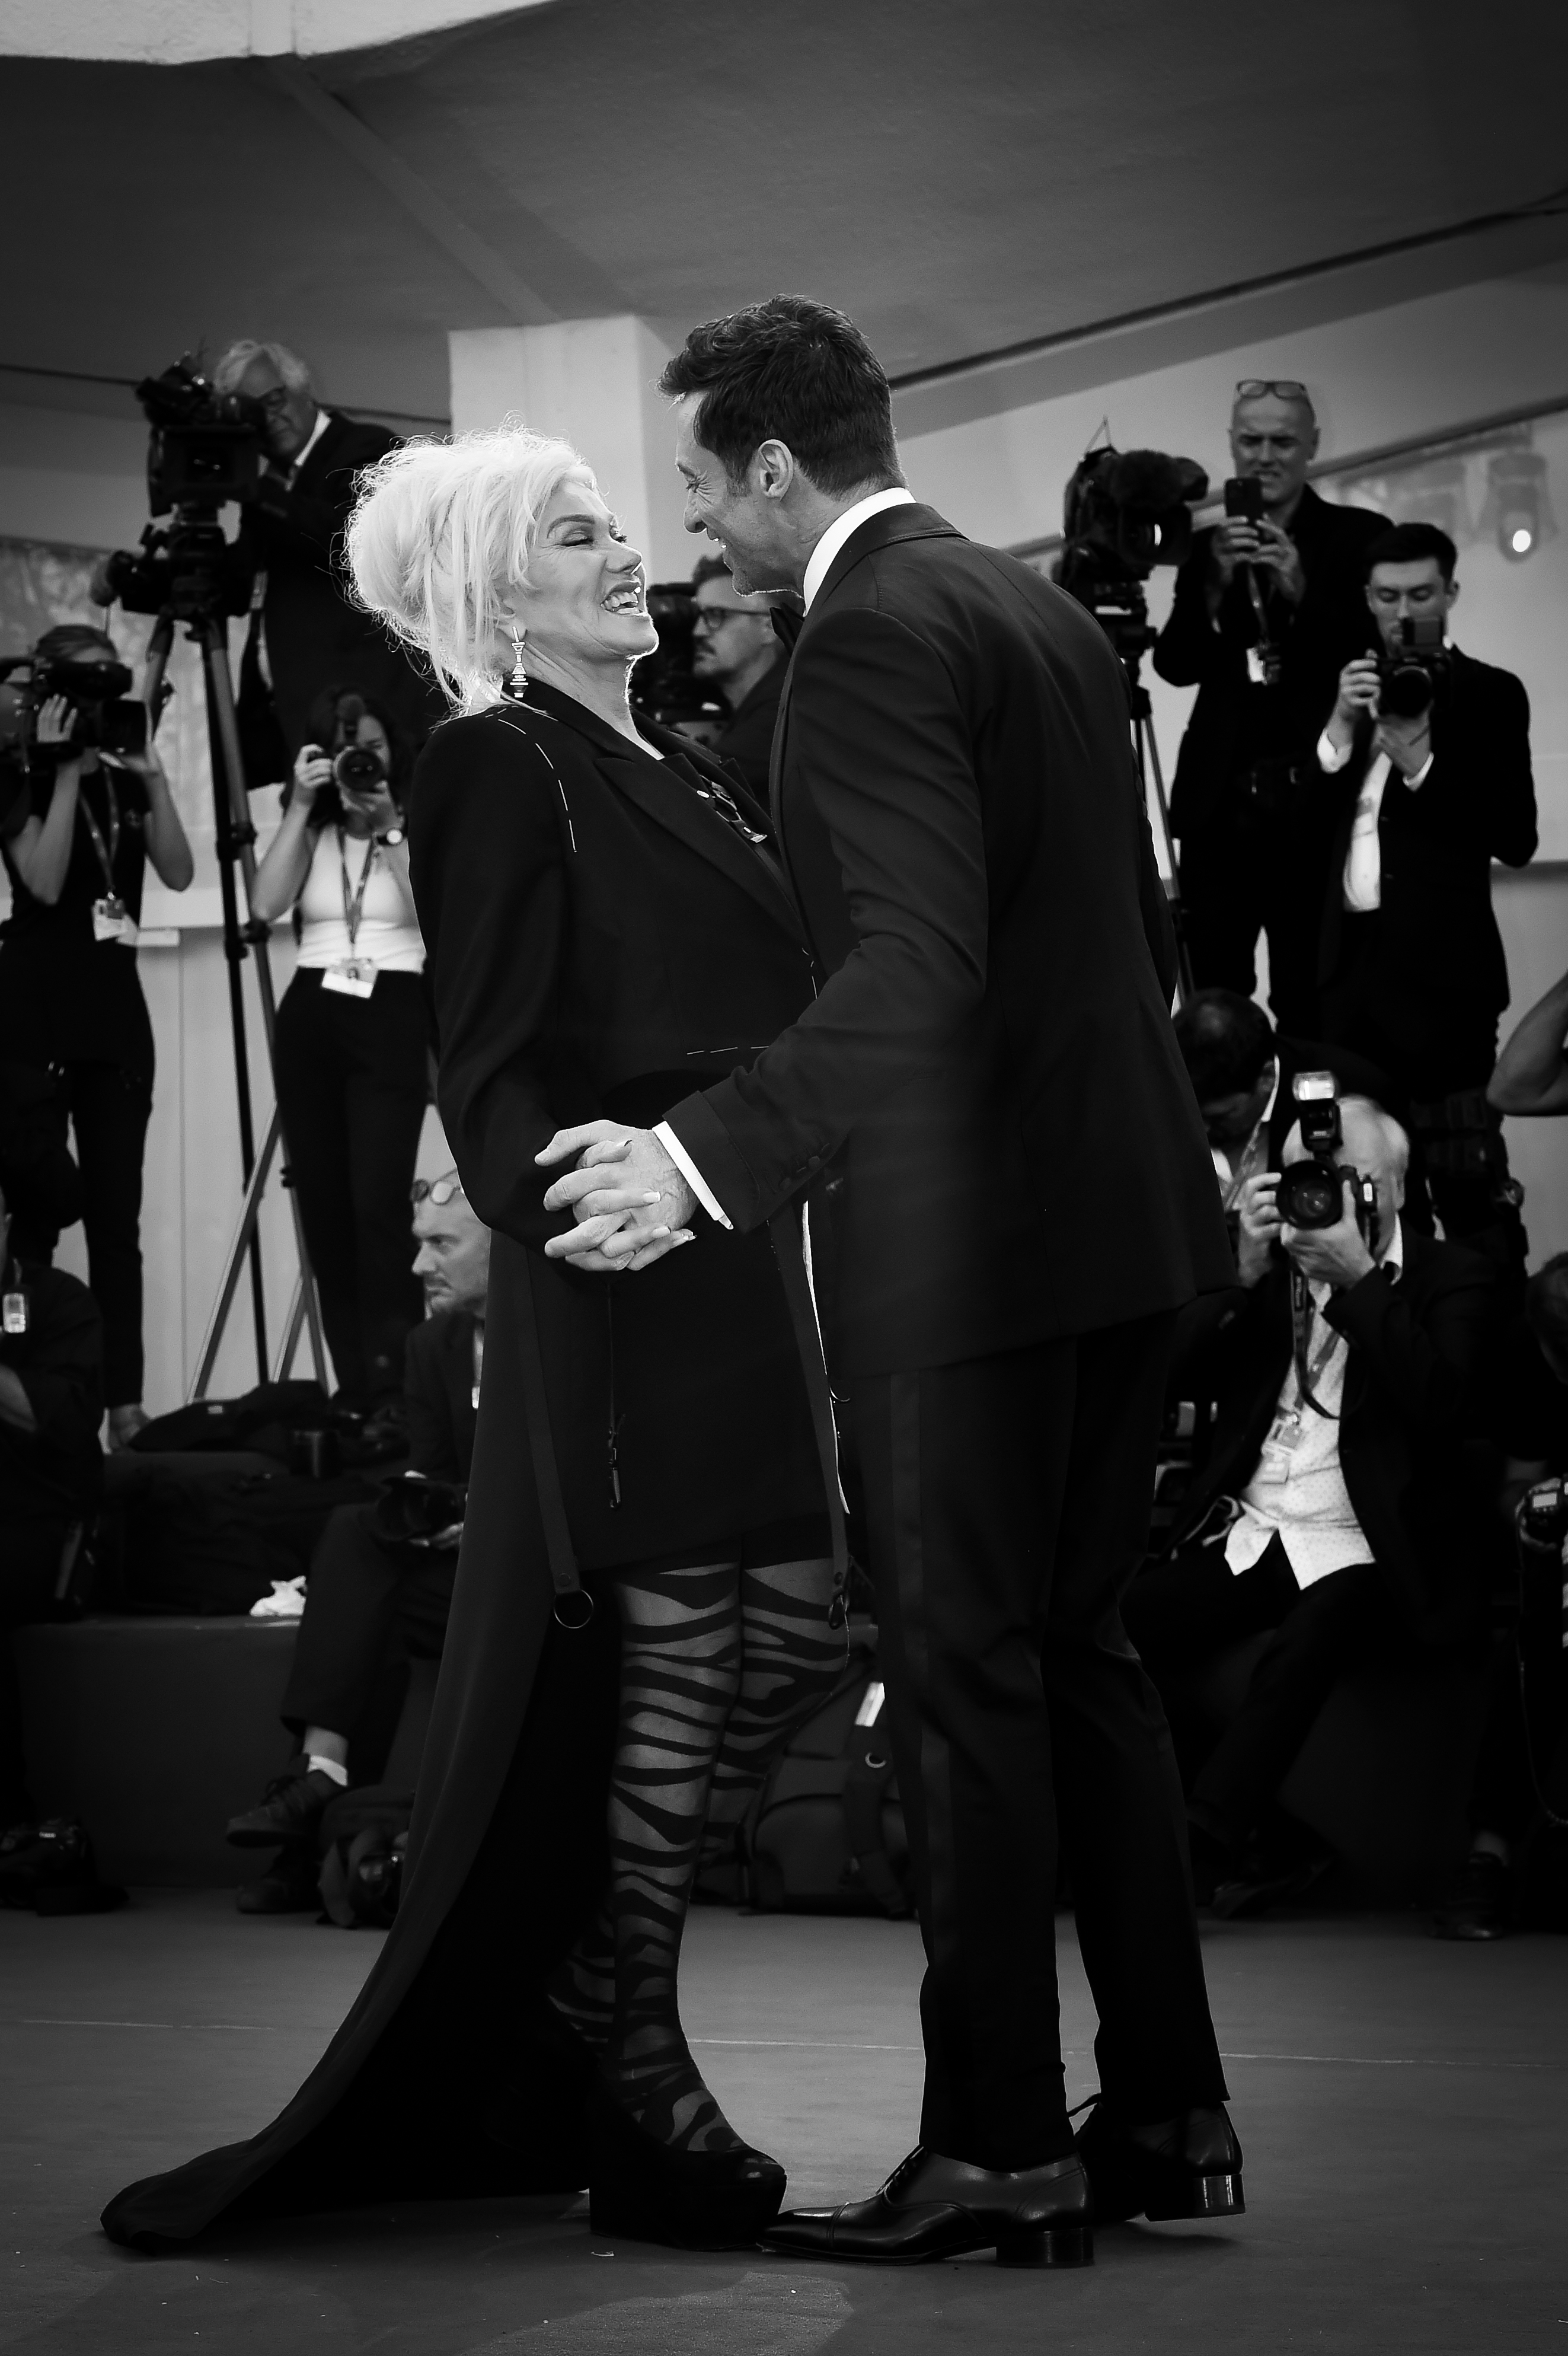 Deborra-Lee Furness and Hugh Jackman at the 79th Venice International Film Festival in Venice, 2022 | Source: Getty Images